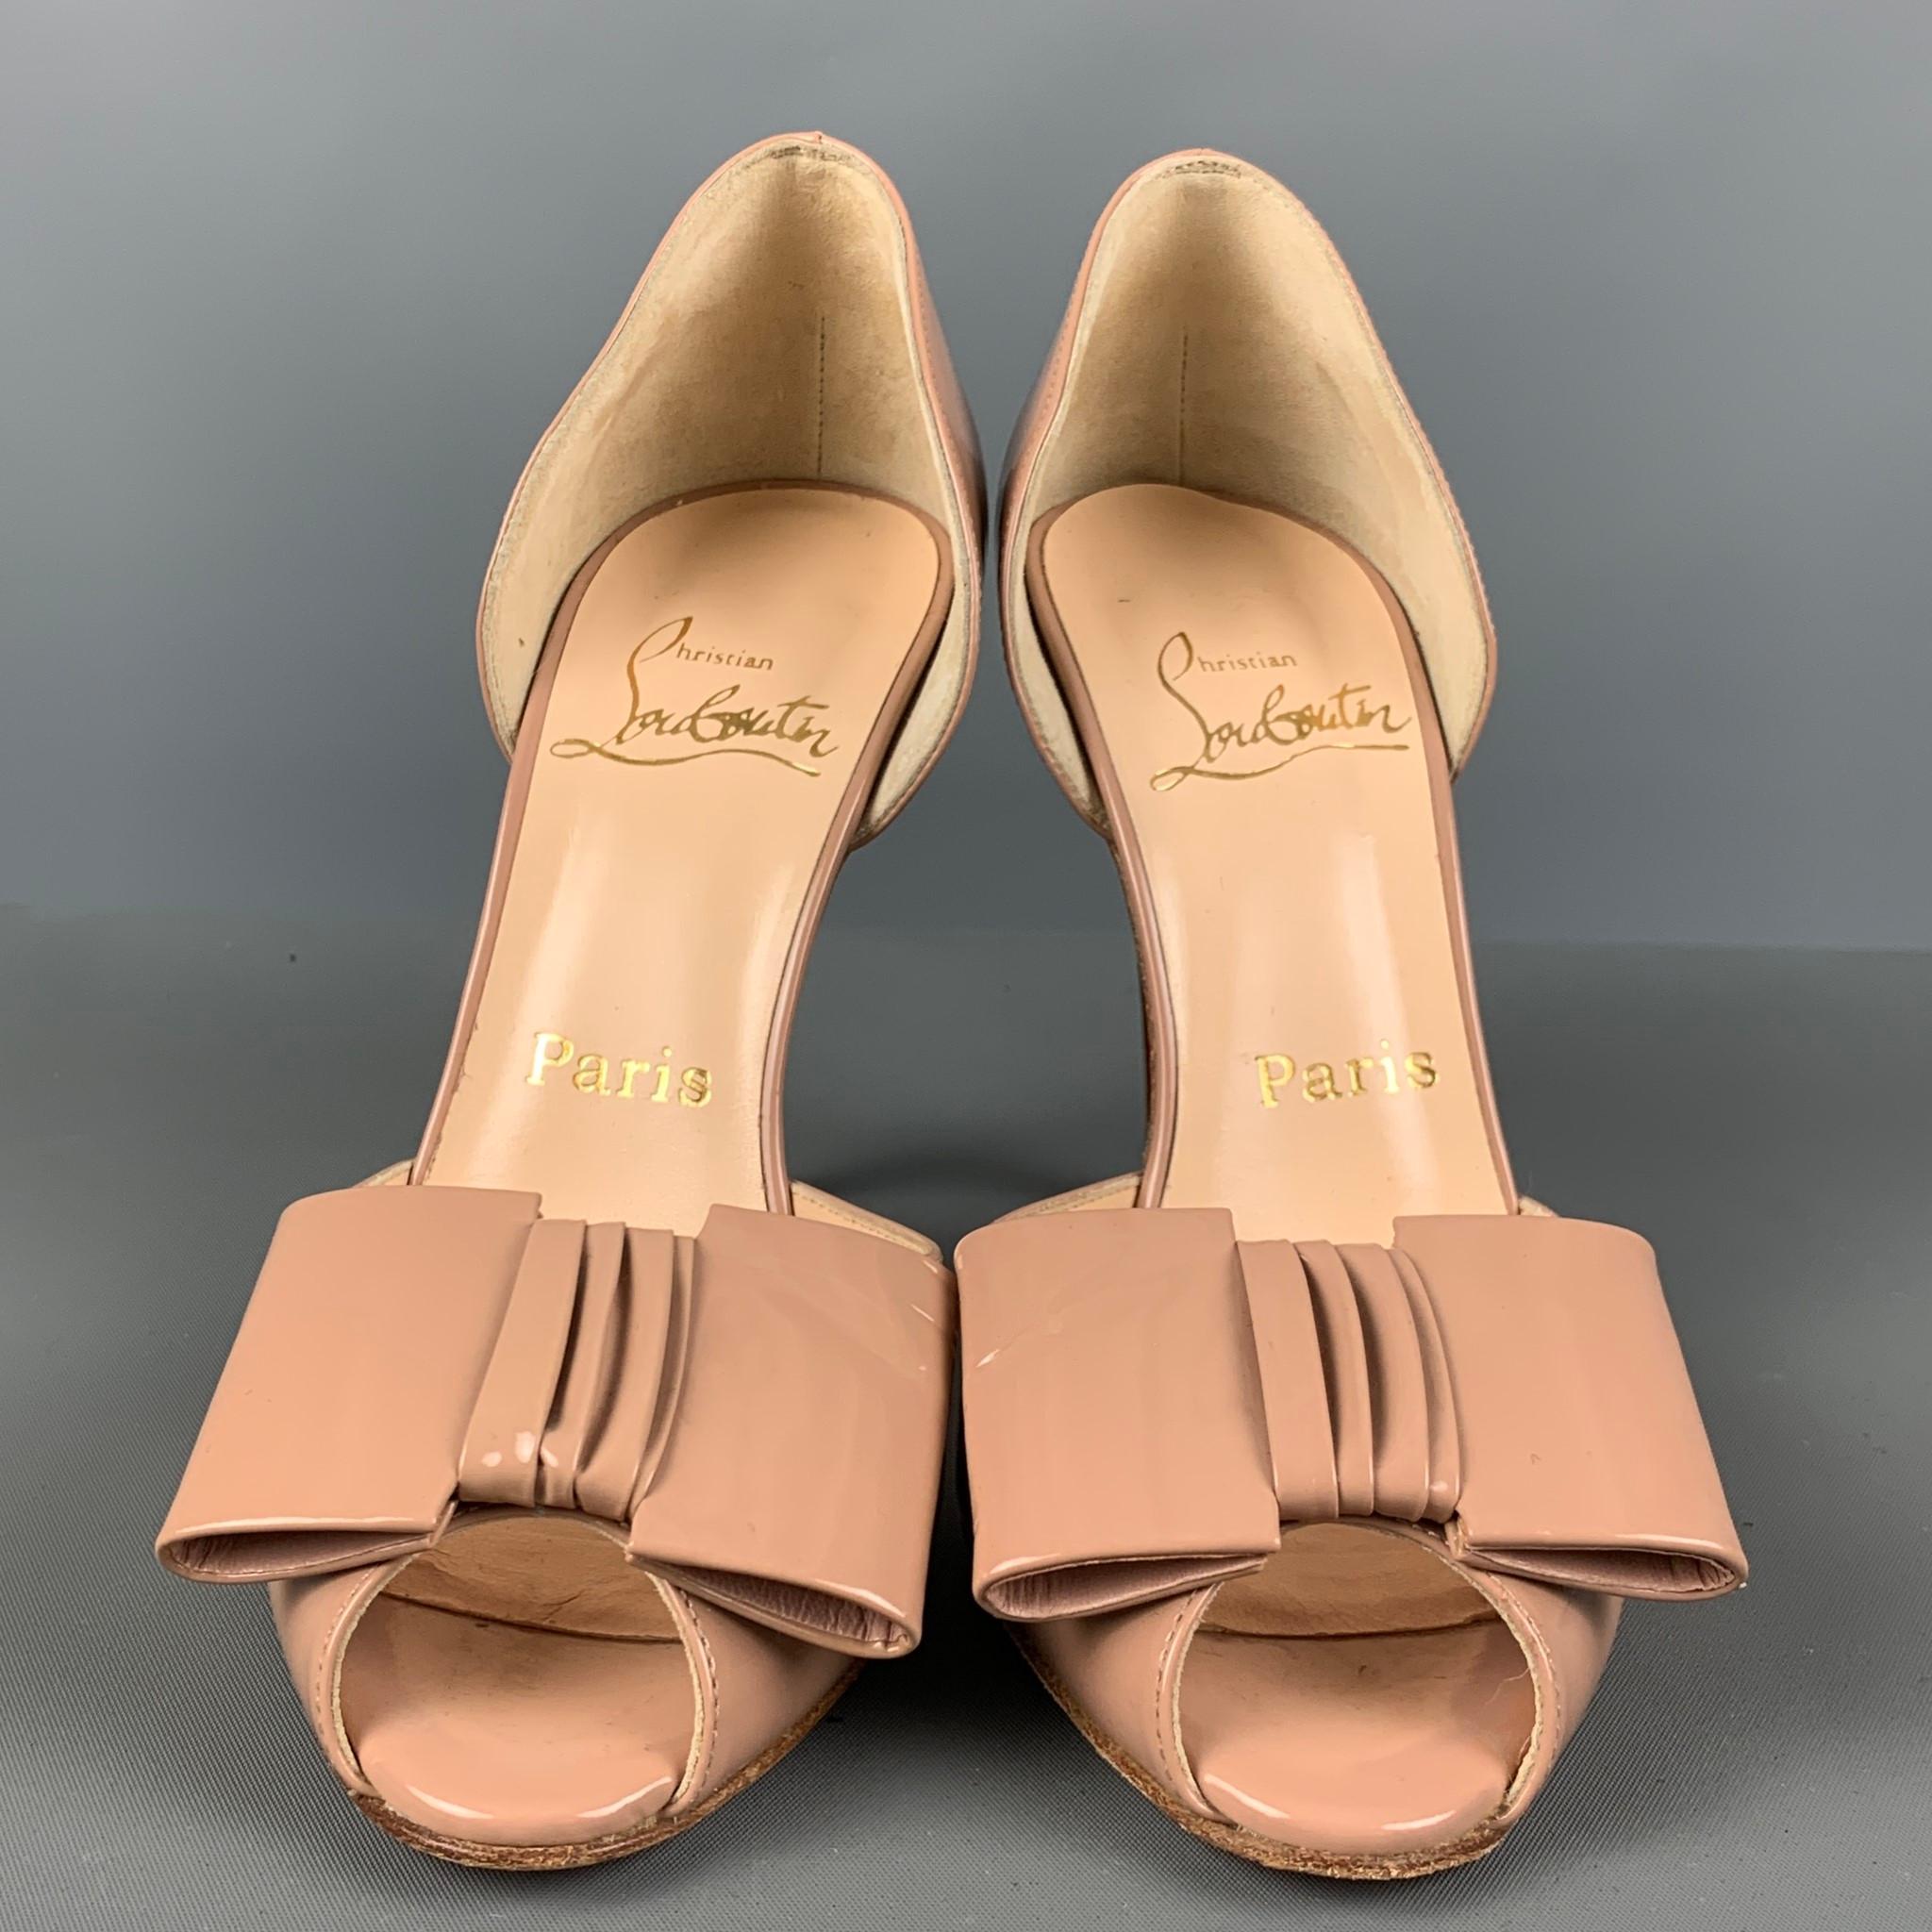 CHRISTIAN LOUBOUTIN Size 6 Beige Nude Patent Leather D'Orsay Pumps 1